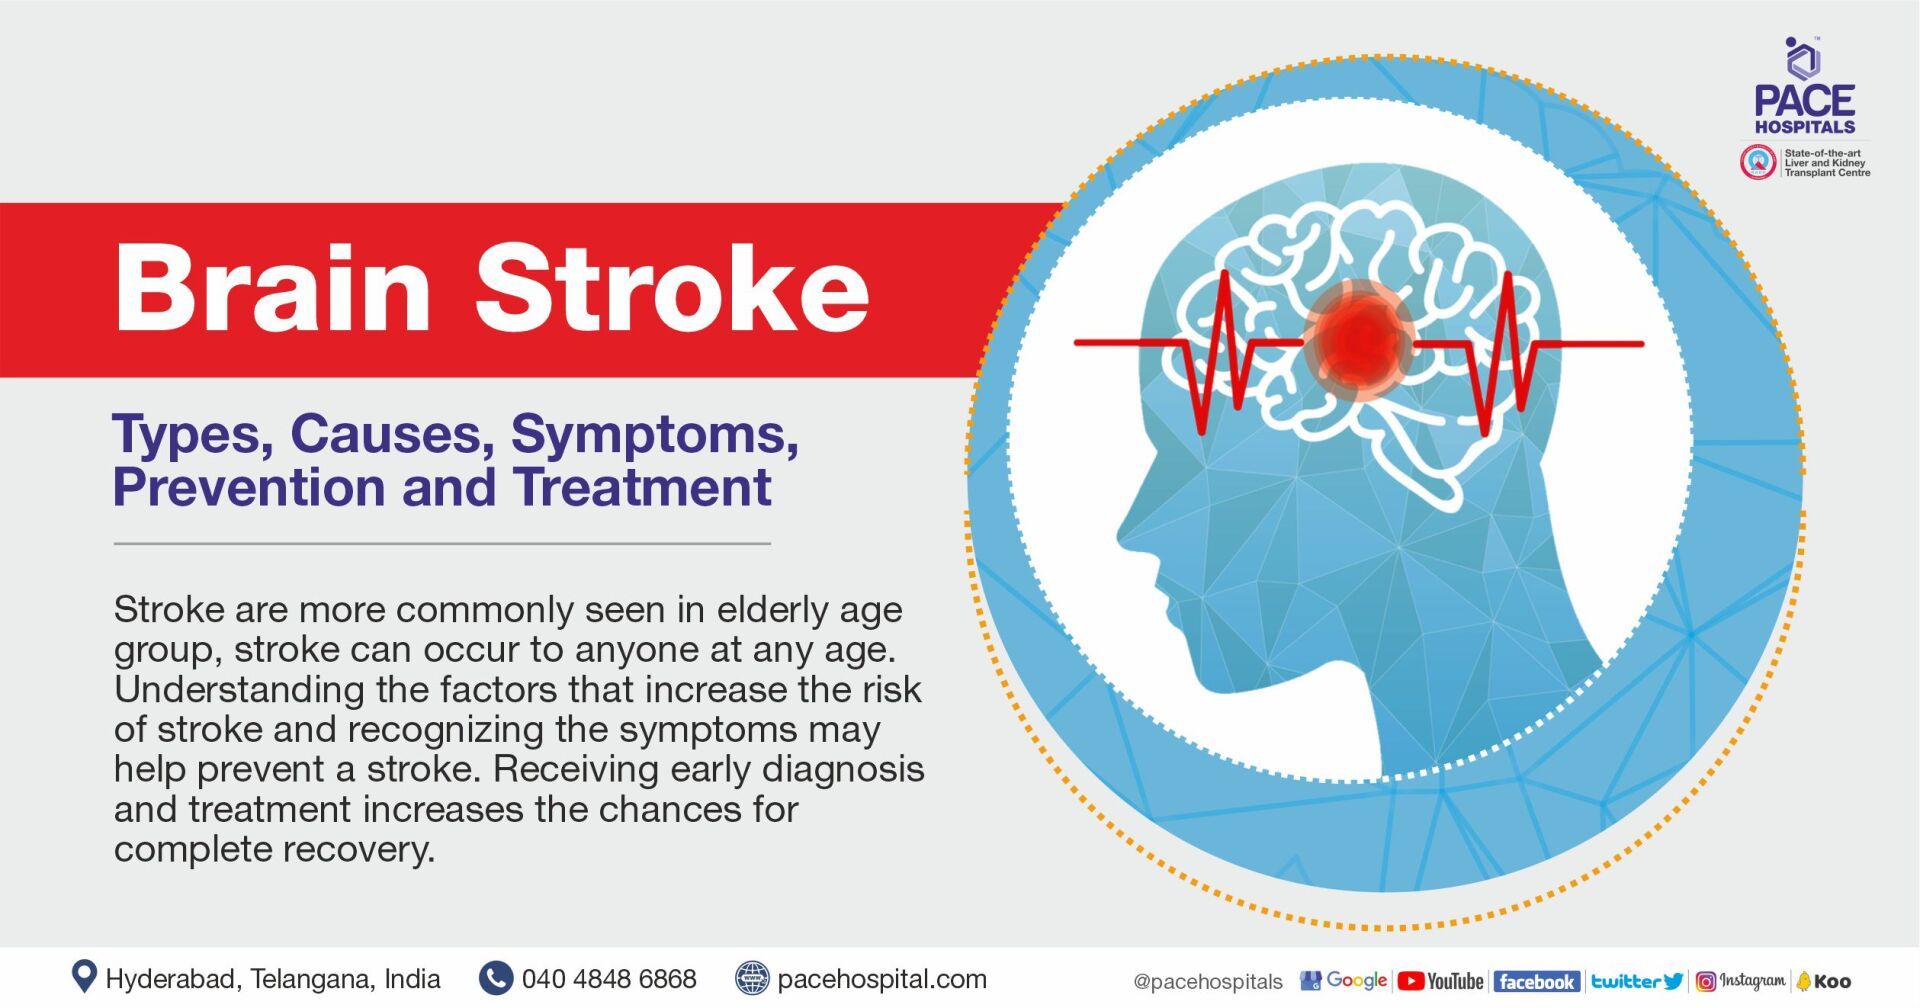 different types of strokes